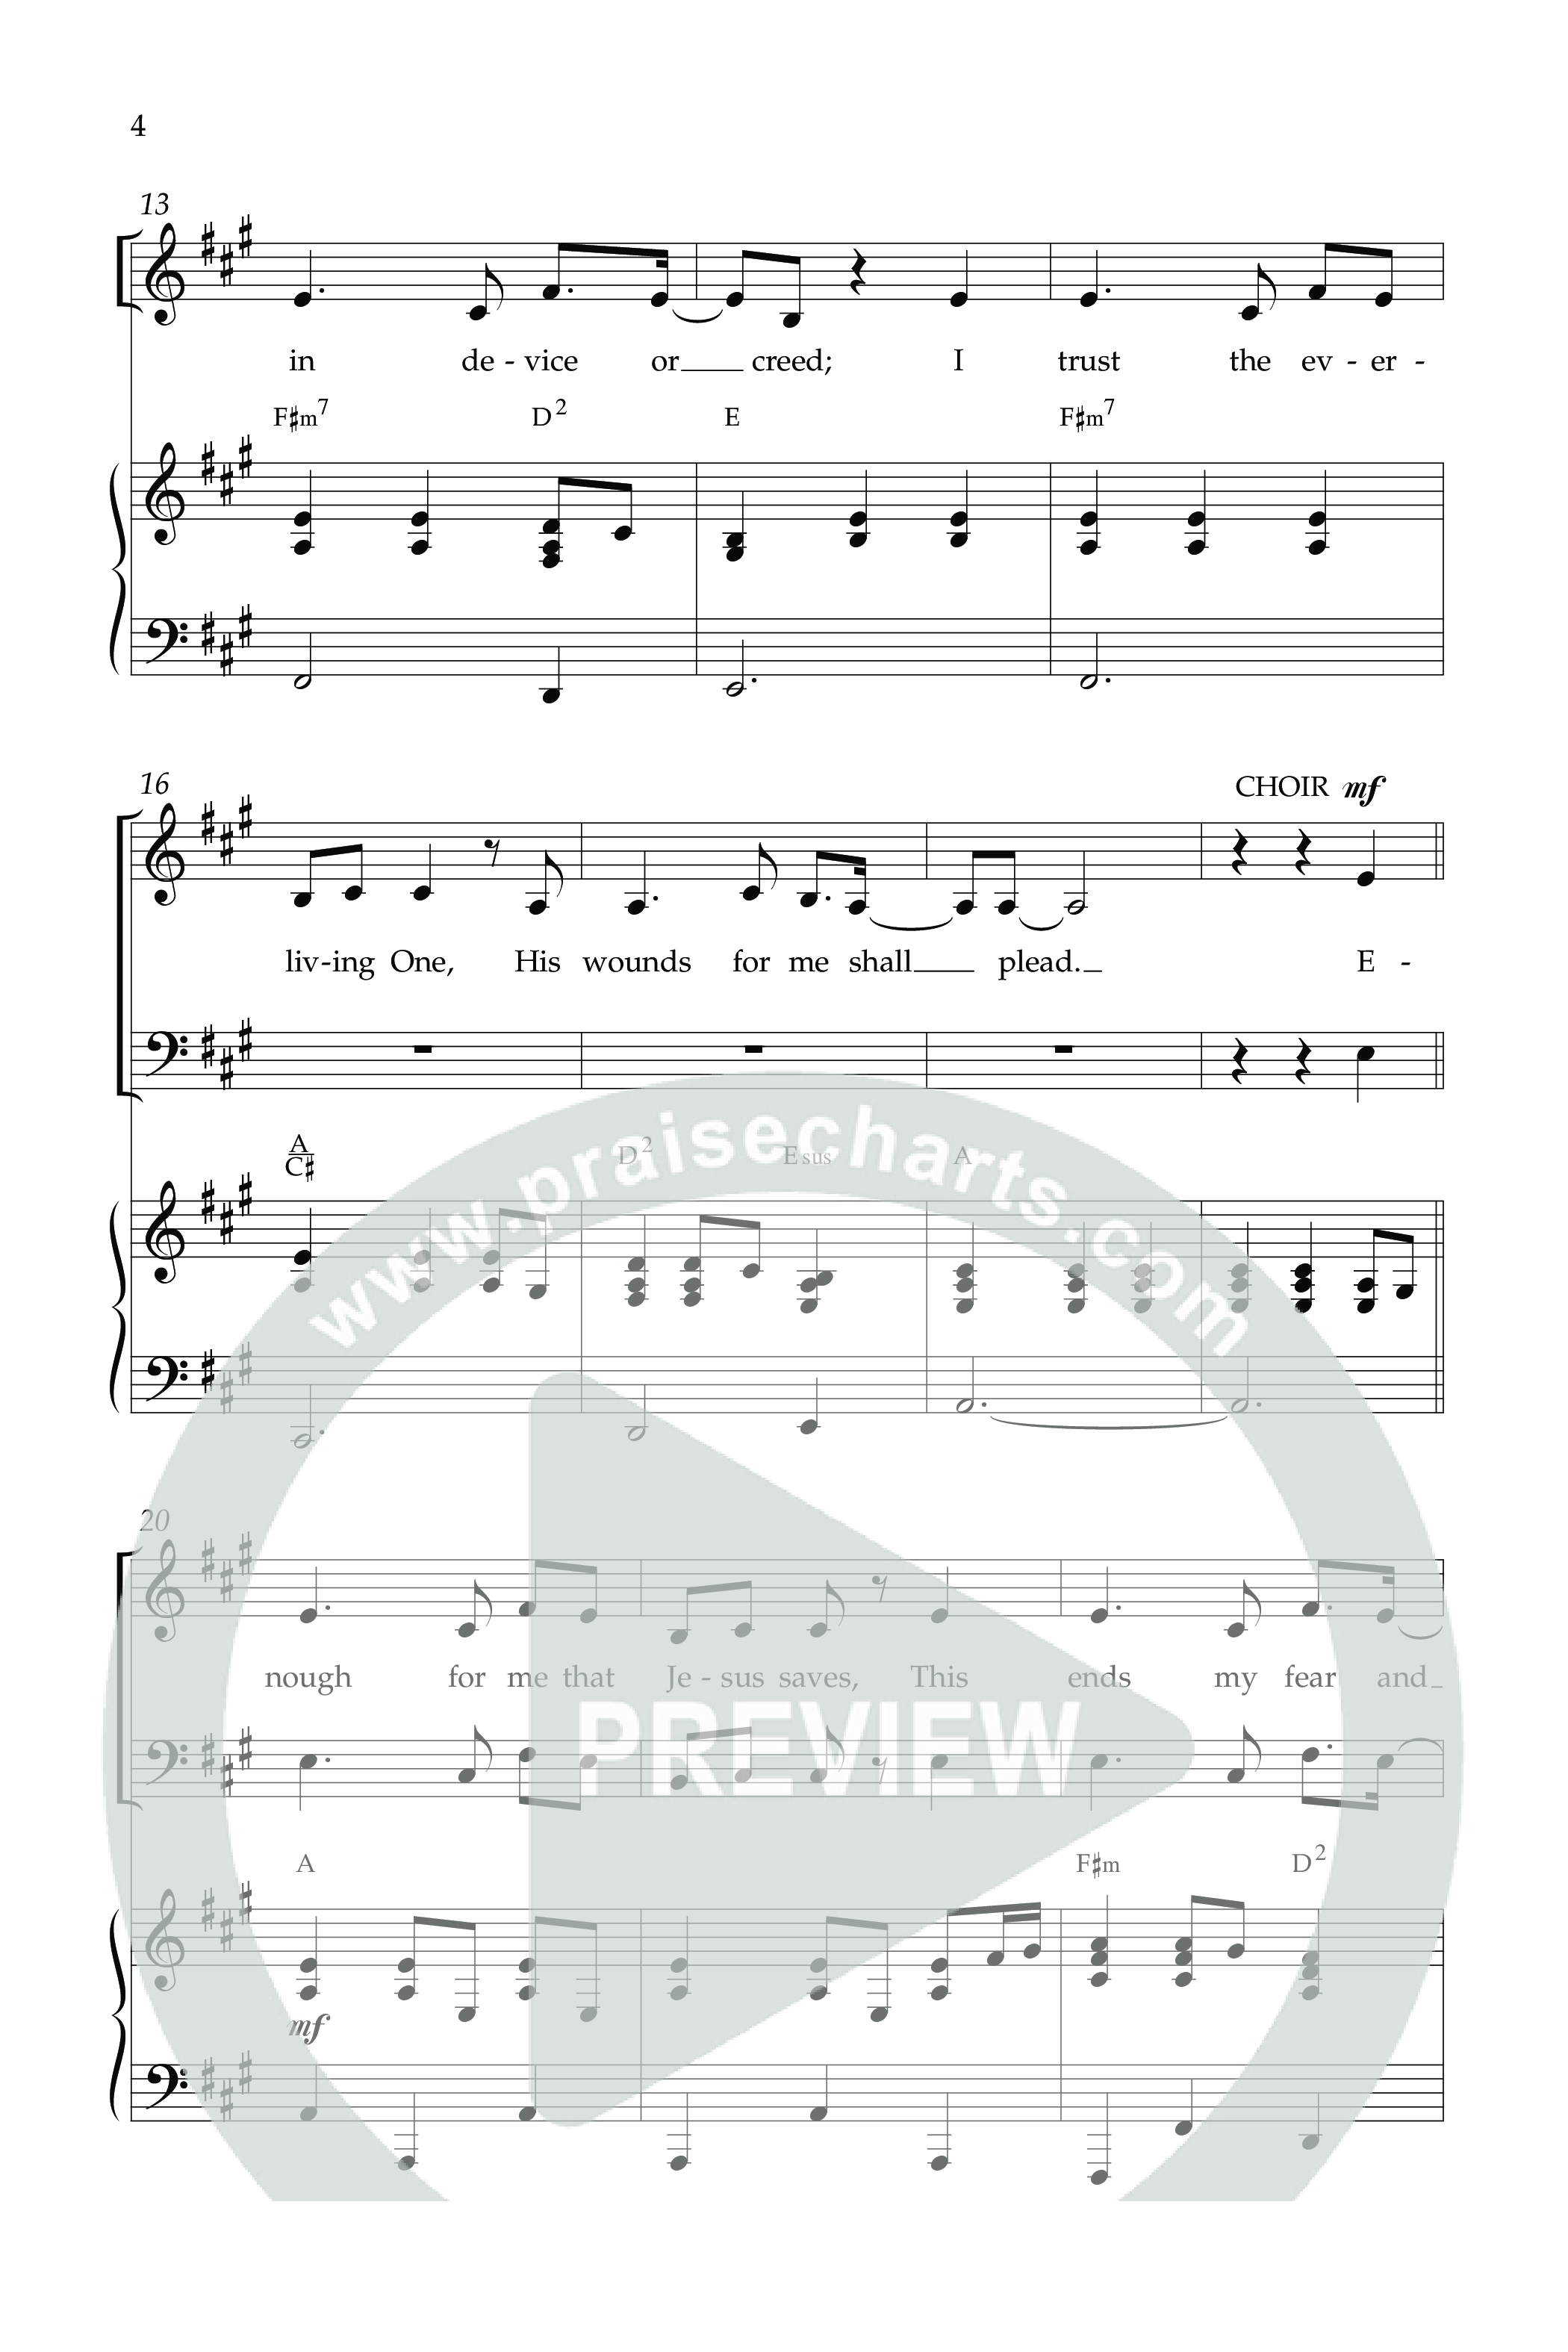 My Faith Has Found a Resting Place (Forever Found) (Choral Anthem SATB) Anthem (SATB/Piano) (Lifeway Choral / Arr. John Bolin / Orch. Cliff Duren)